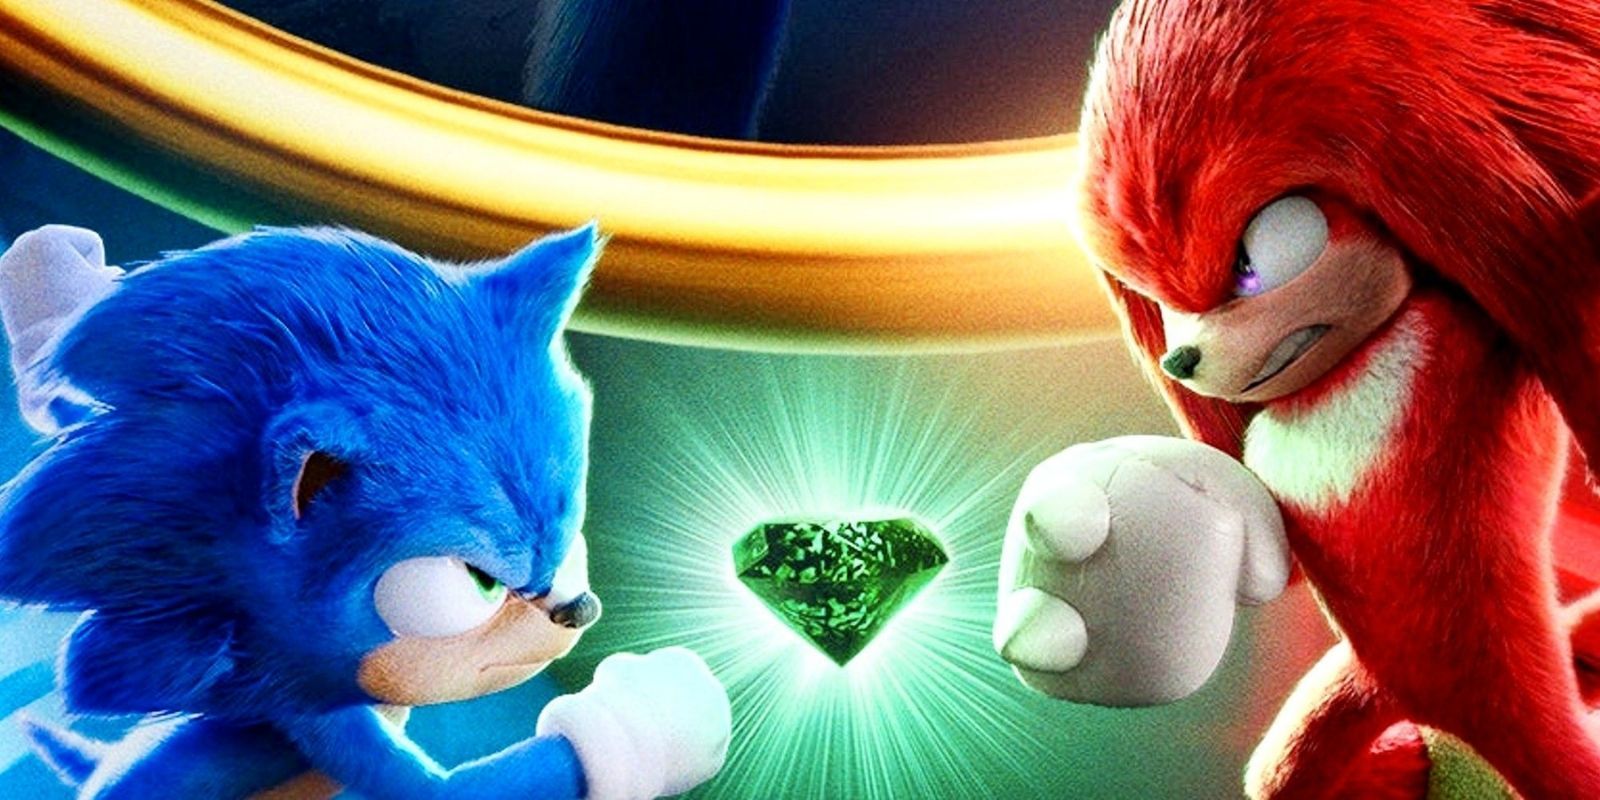 Sonic clashes with Knuckles in Sonic the Hedgehog 2